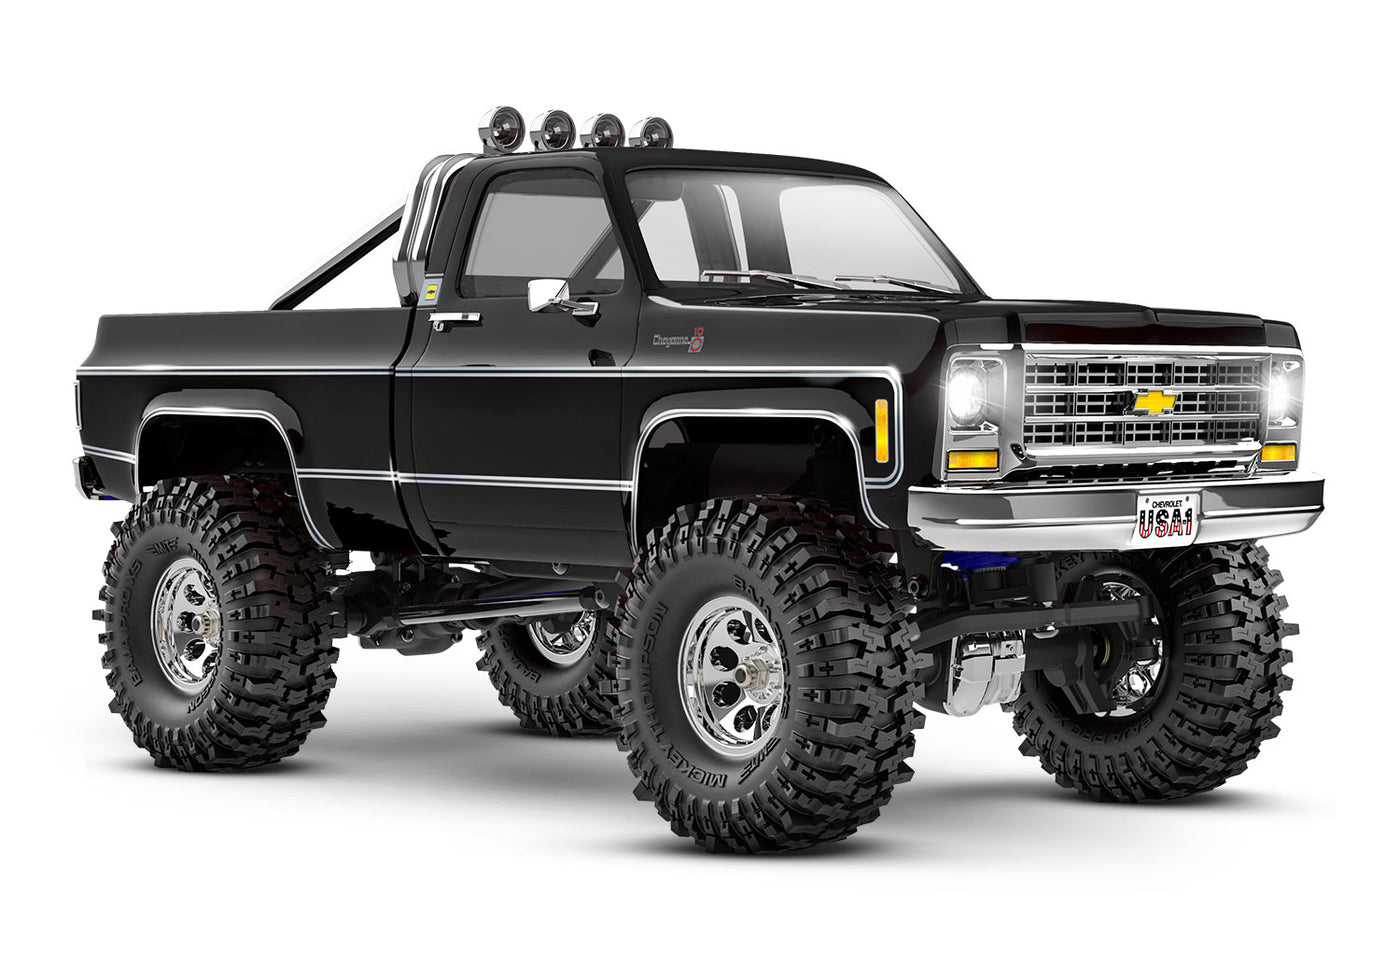 TRX-4M™ Chevrolet® K10 High Trail™ Traxxas #97064-1 In-store pick-up only